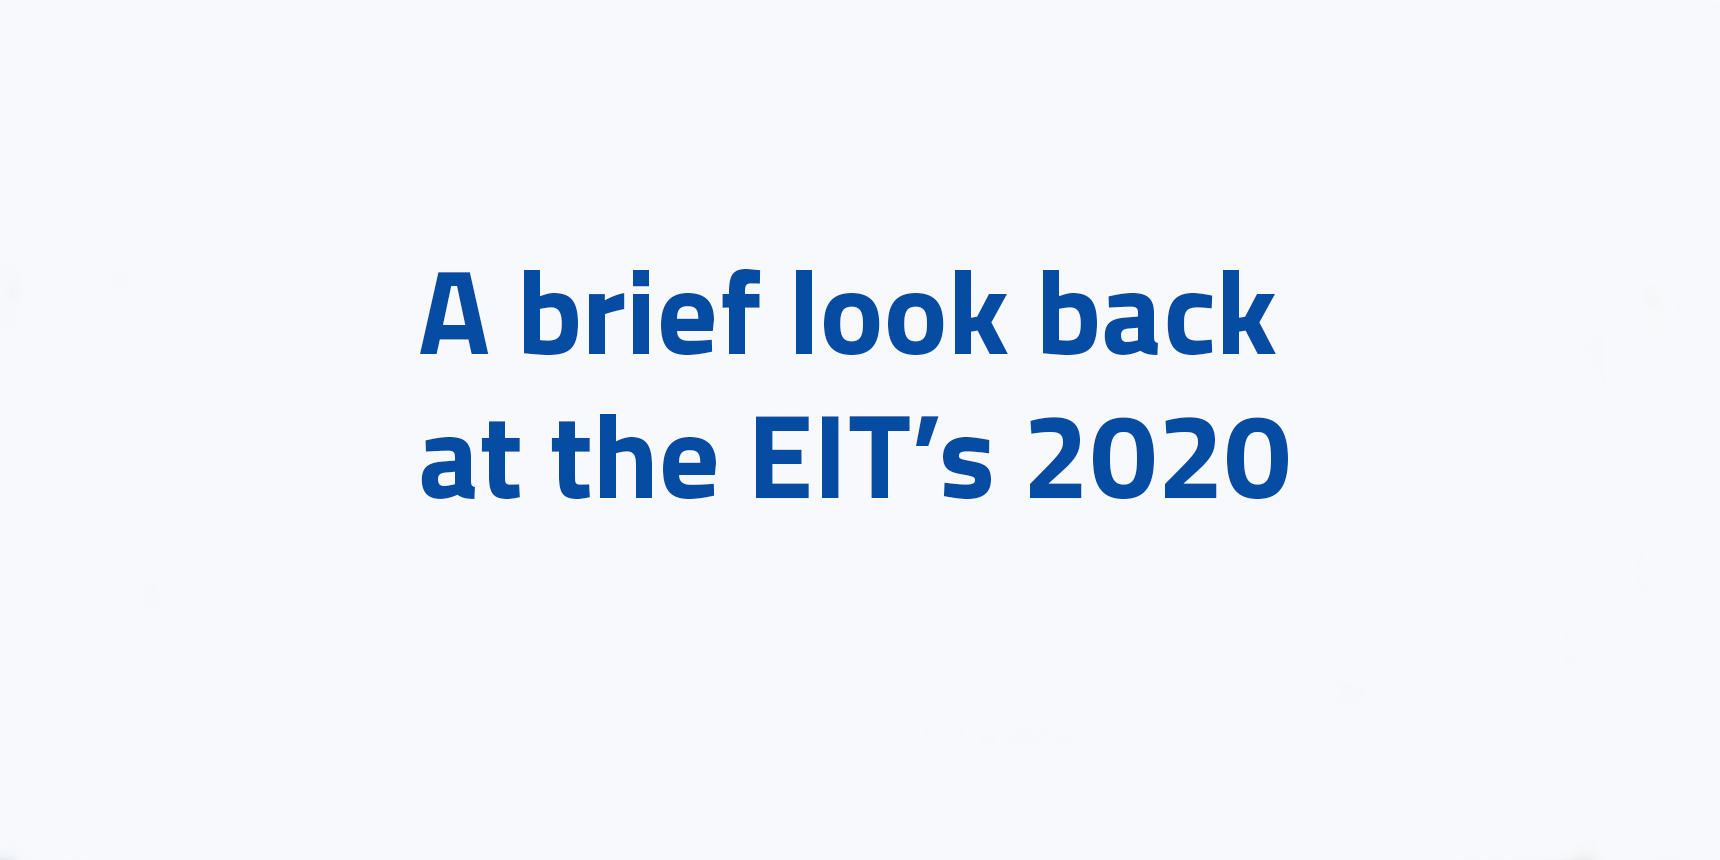 A brief look back at the EIT's 2020